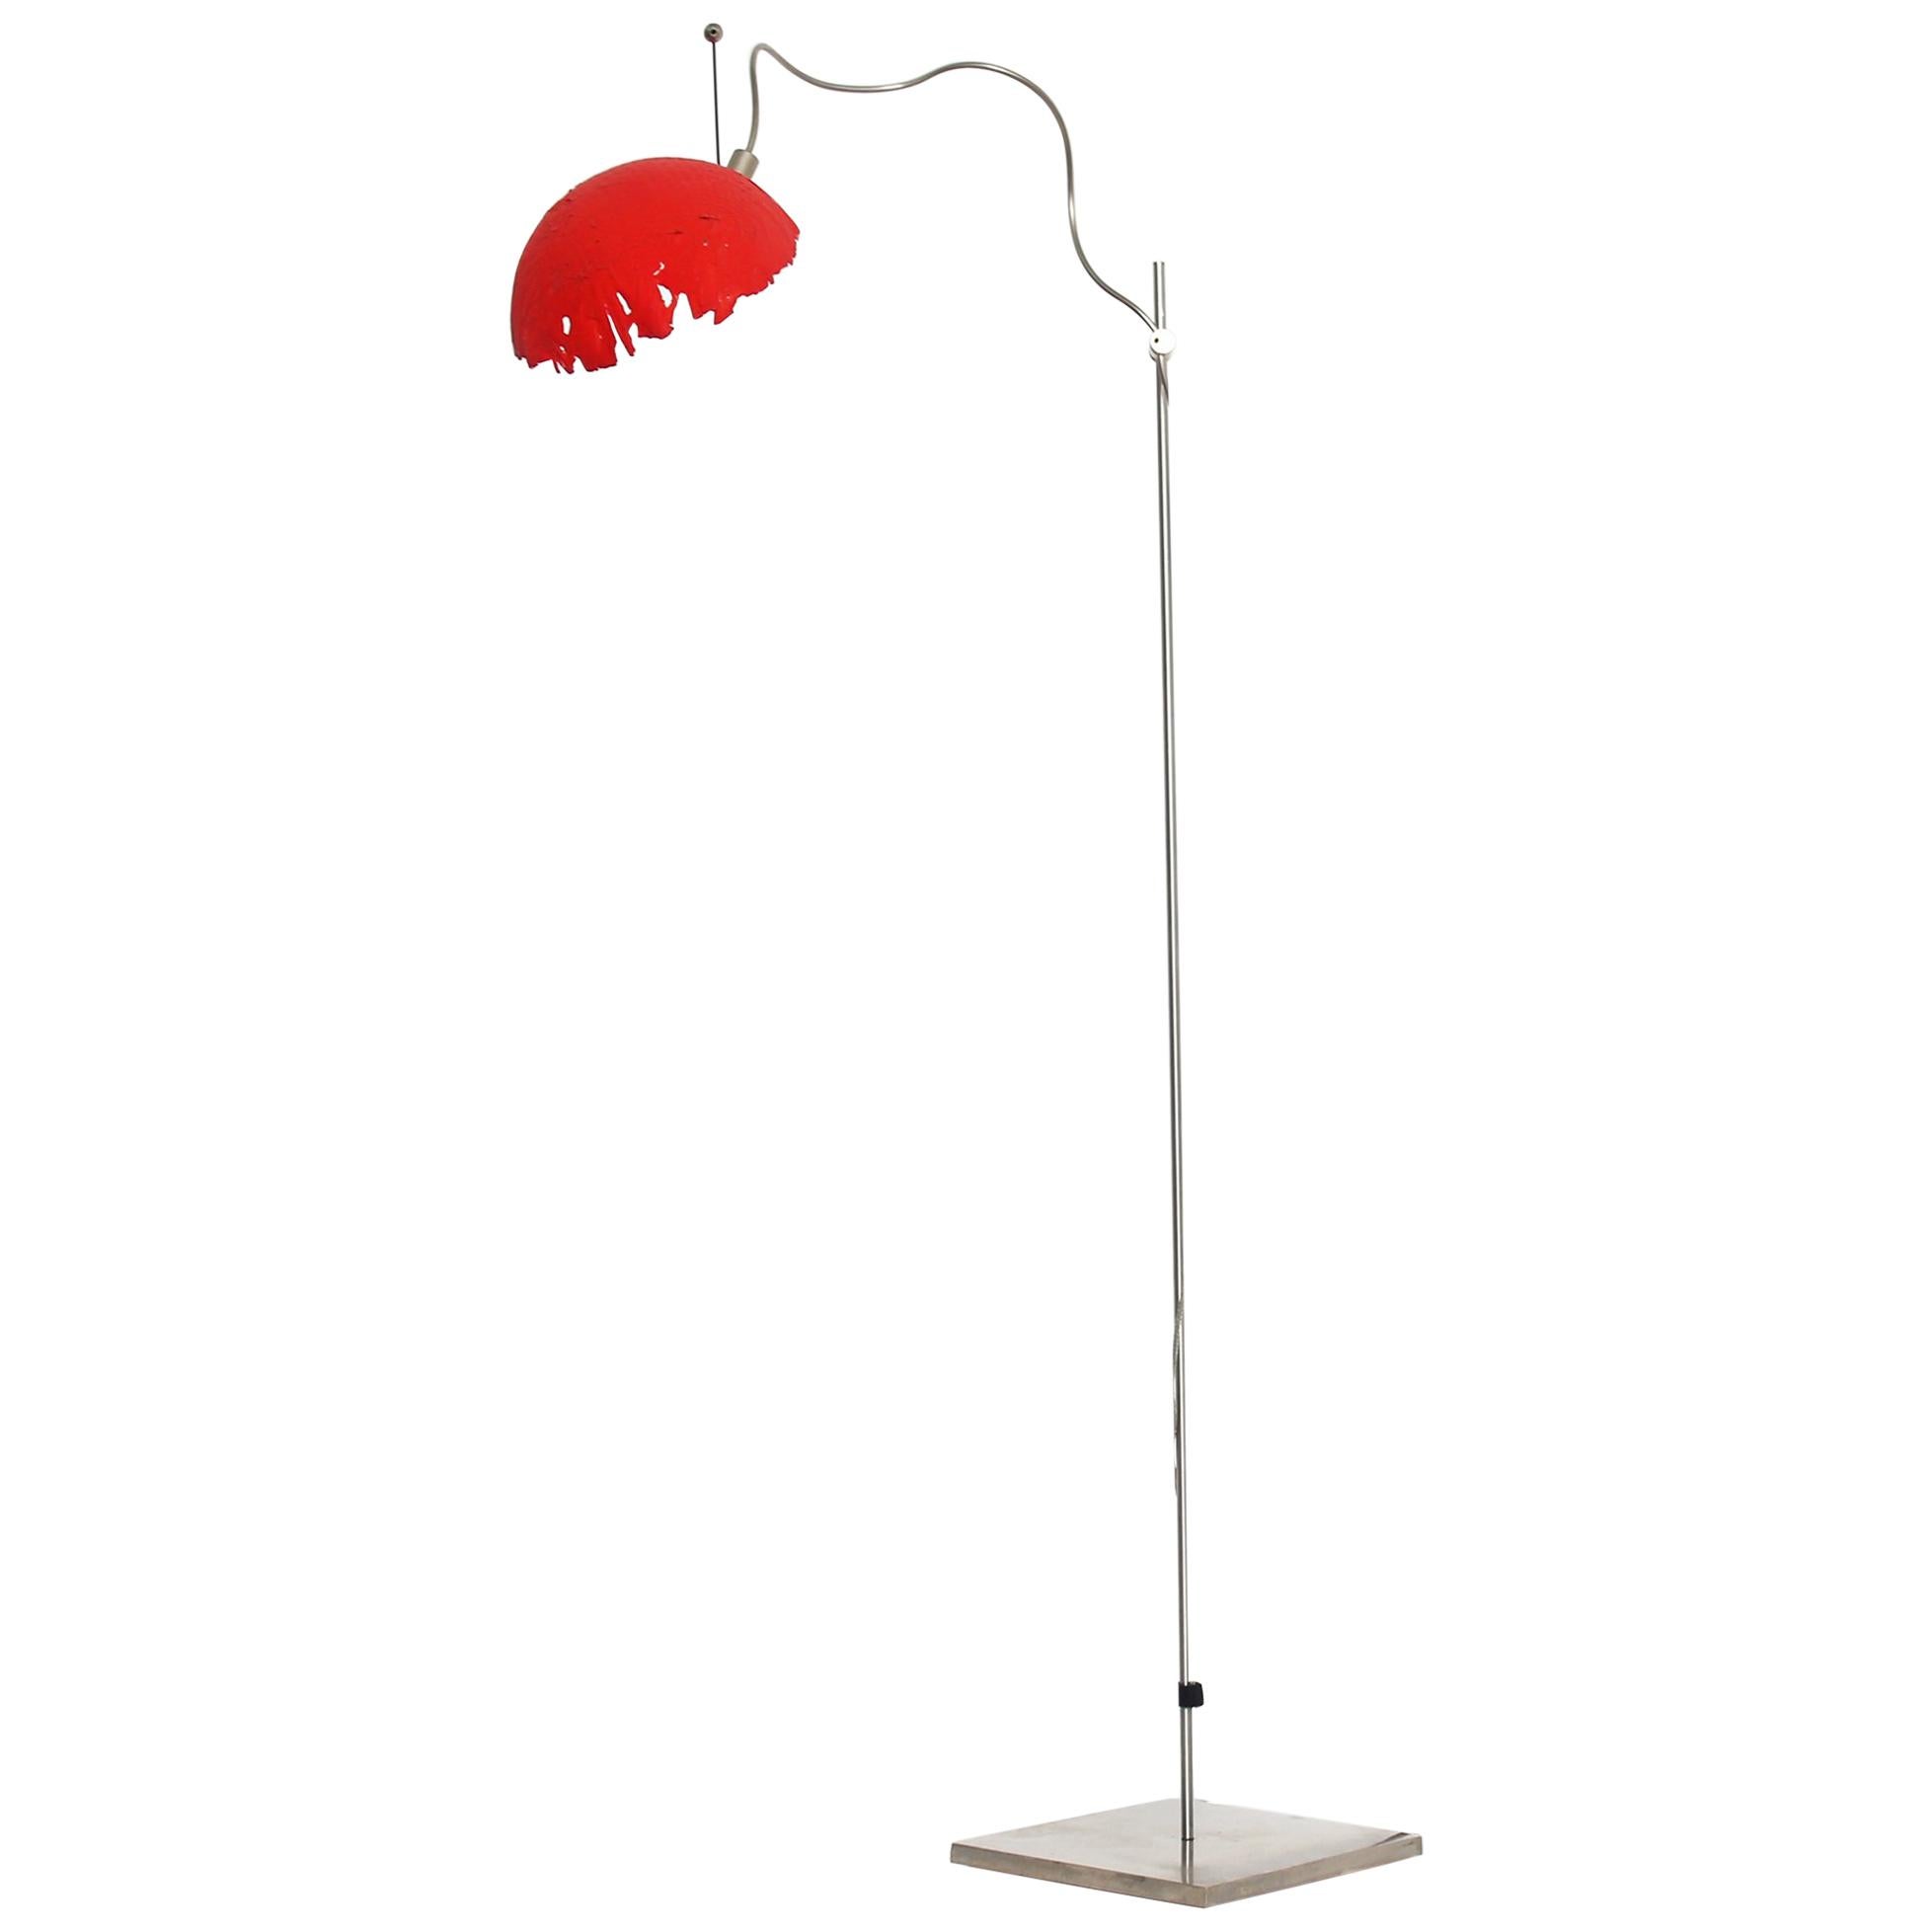 Italian Modern Catellani&Smith Red Table Lamp, 2004 For Sale